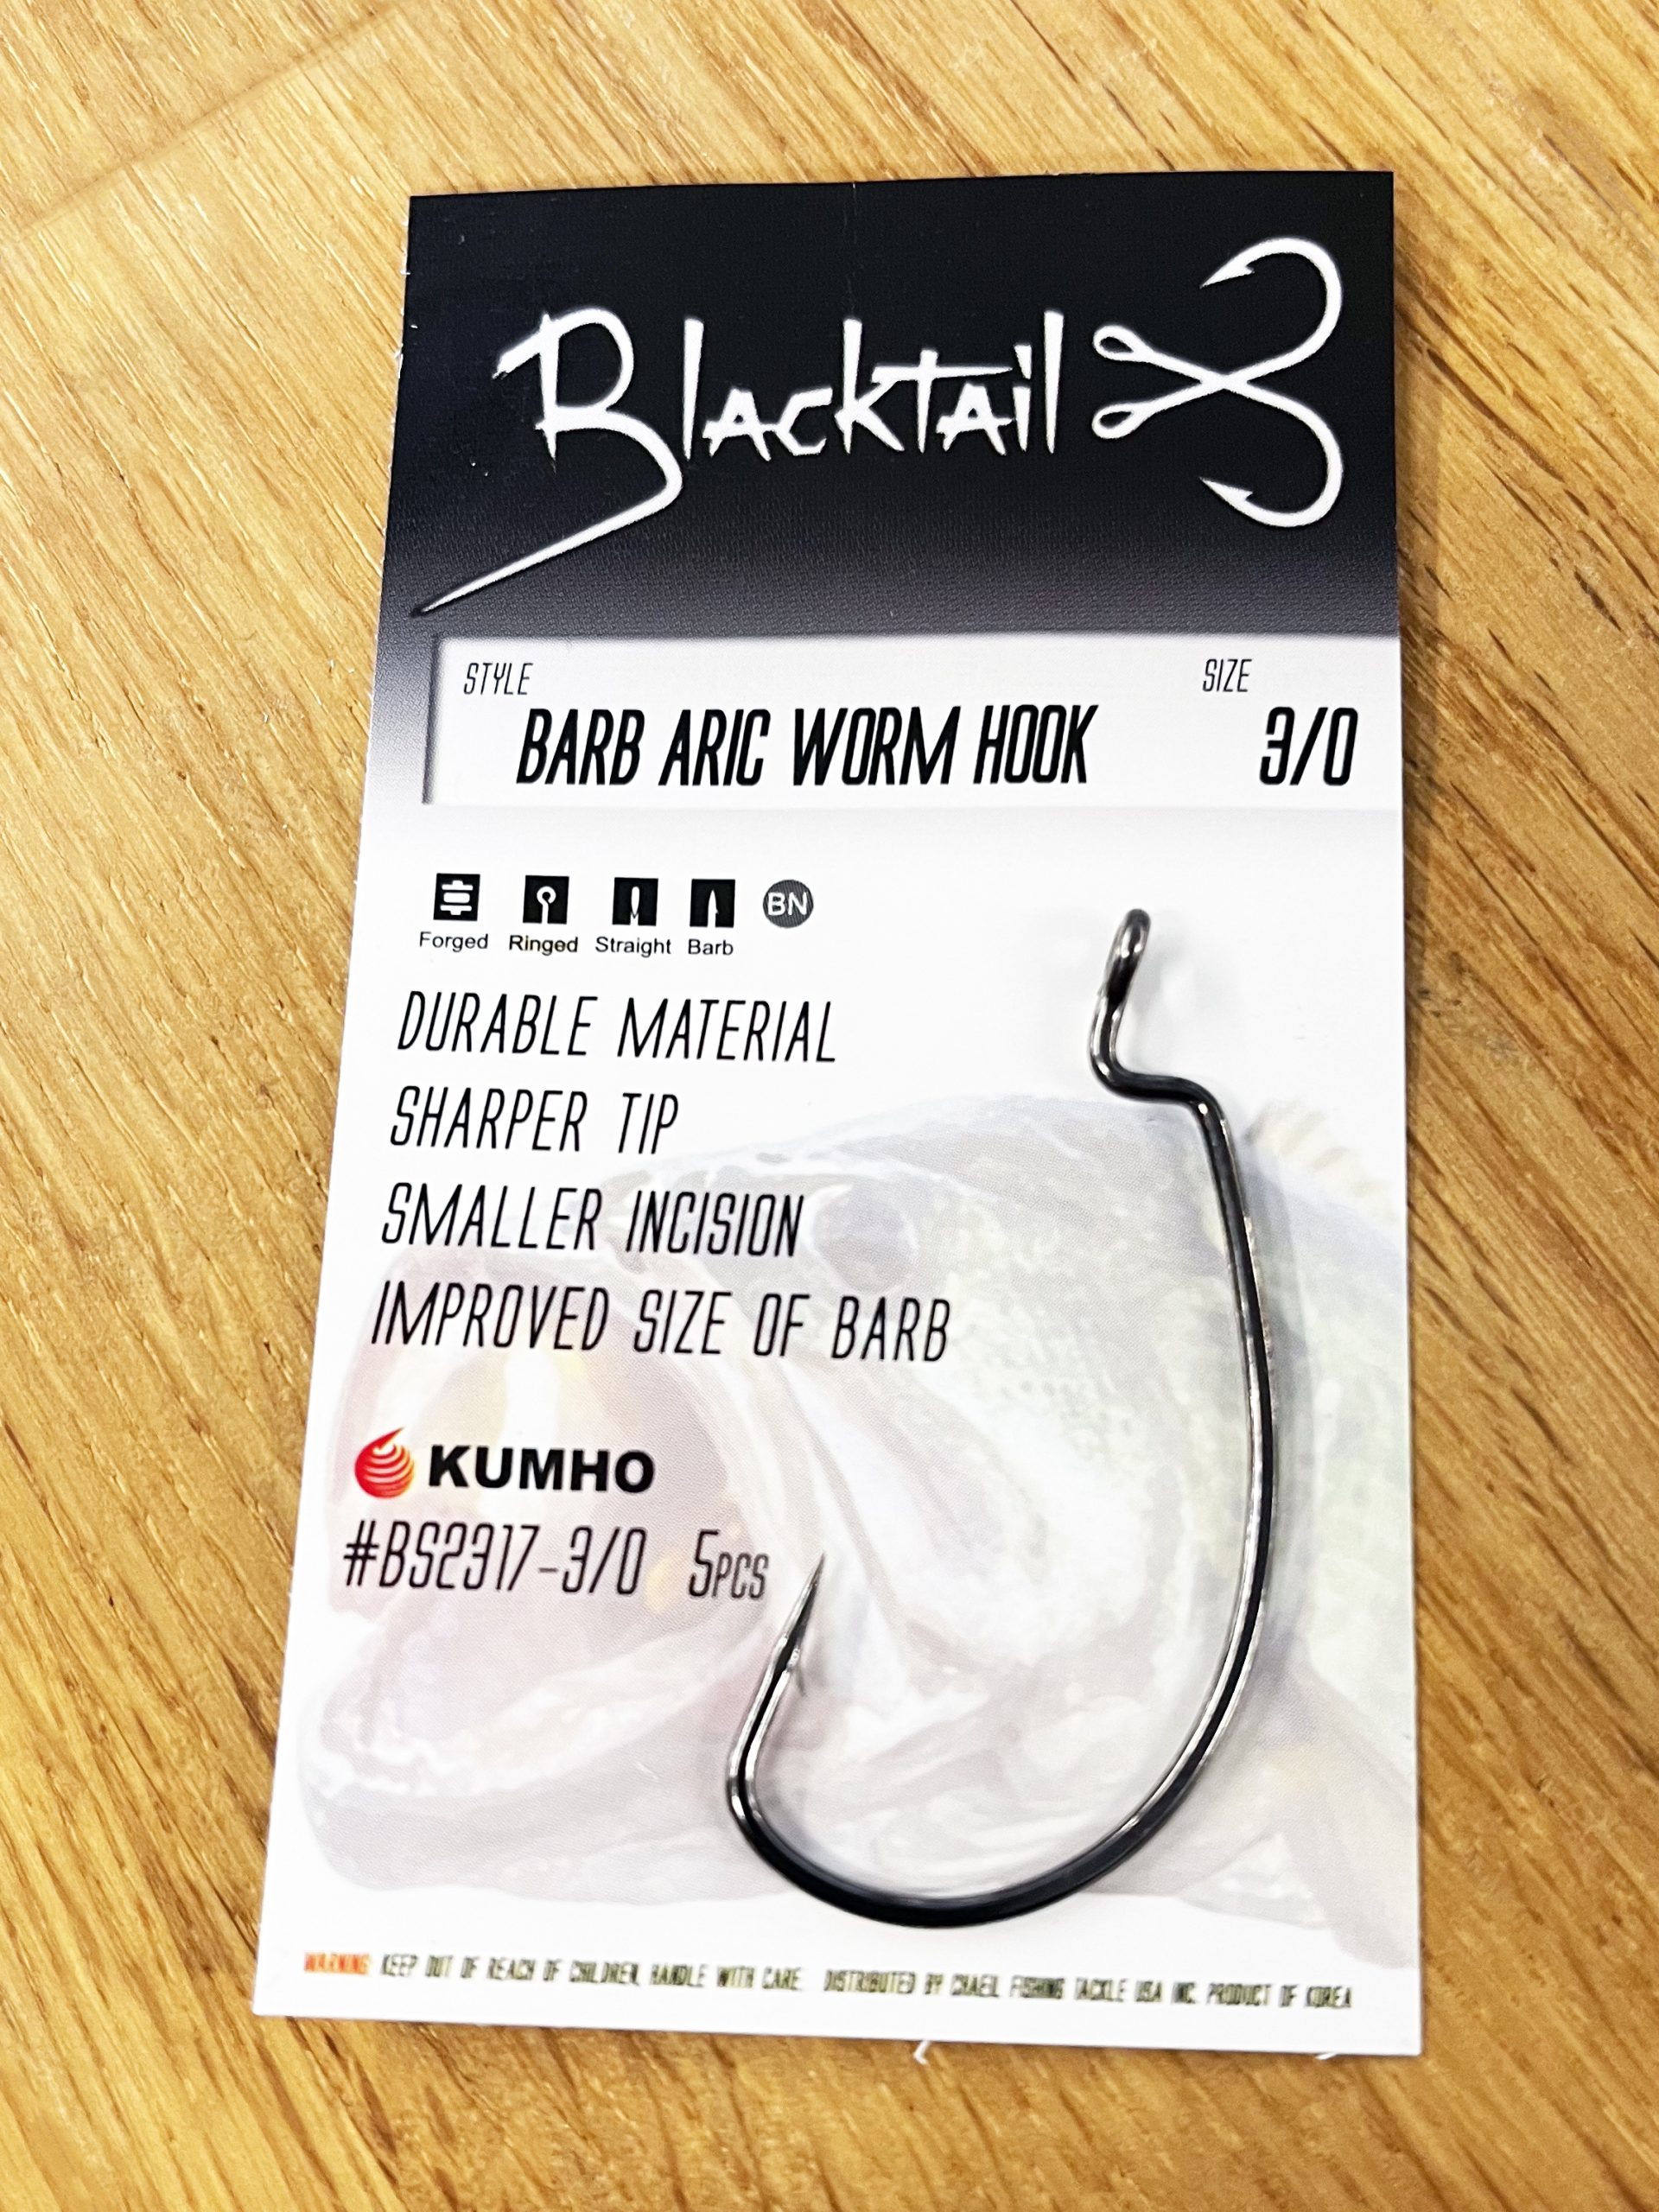 Barb Aric Worm Hook – Strong EWG(Extra Wide Gap) Hook